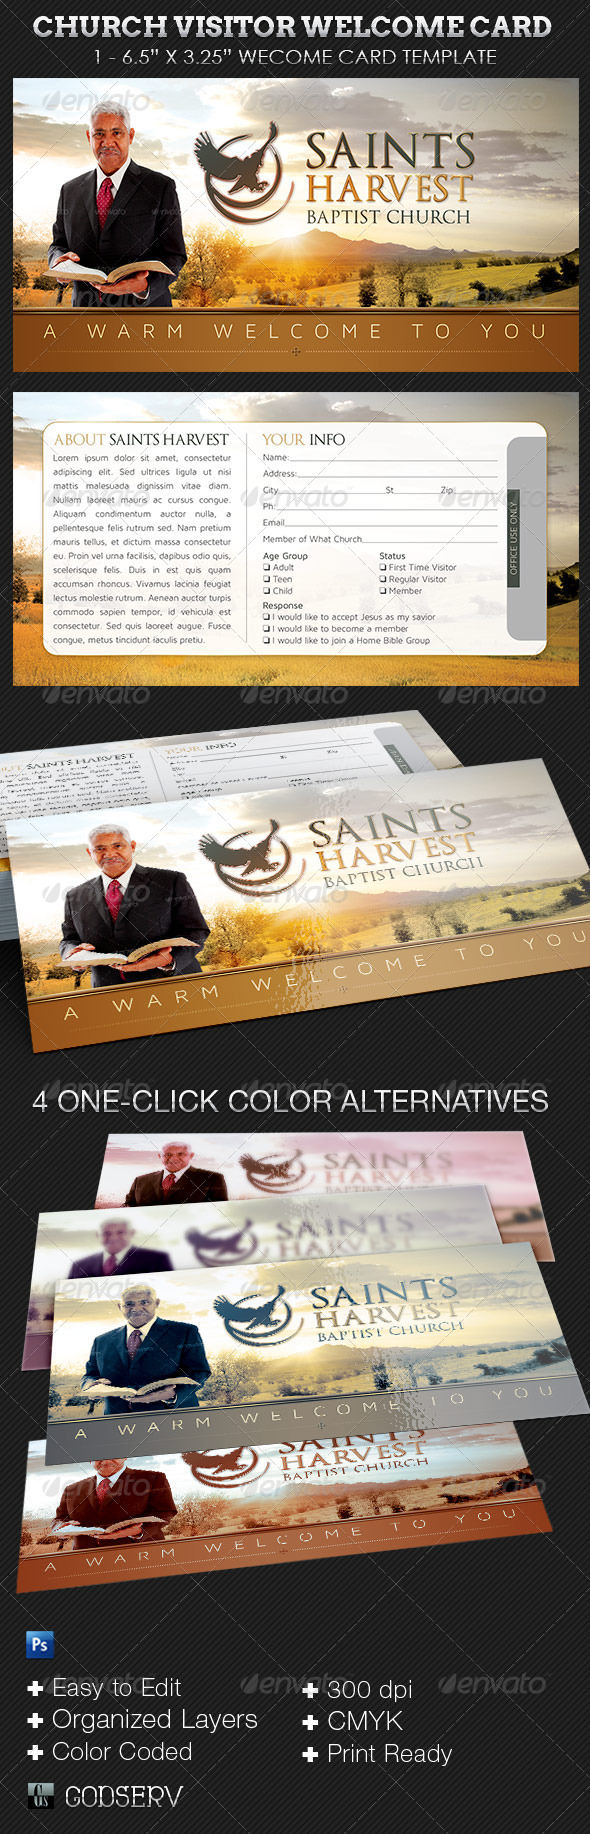 Church-Visitor-Welcome-Card-Template-Preview